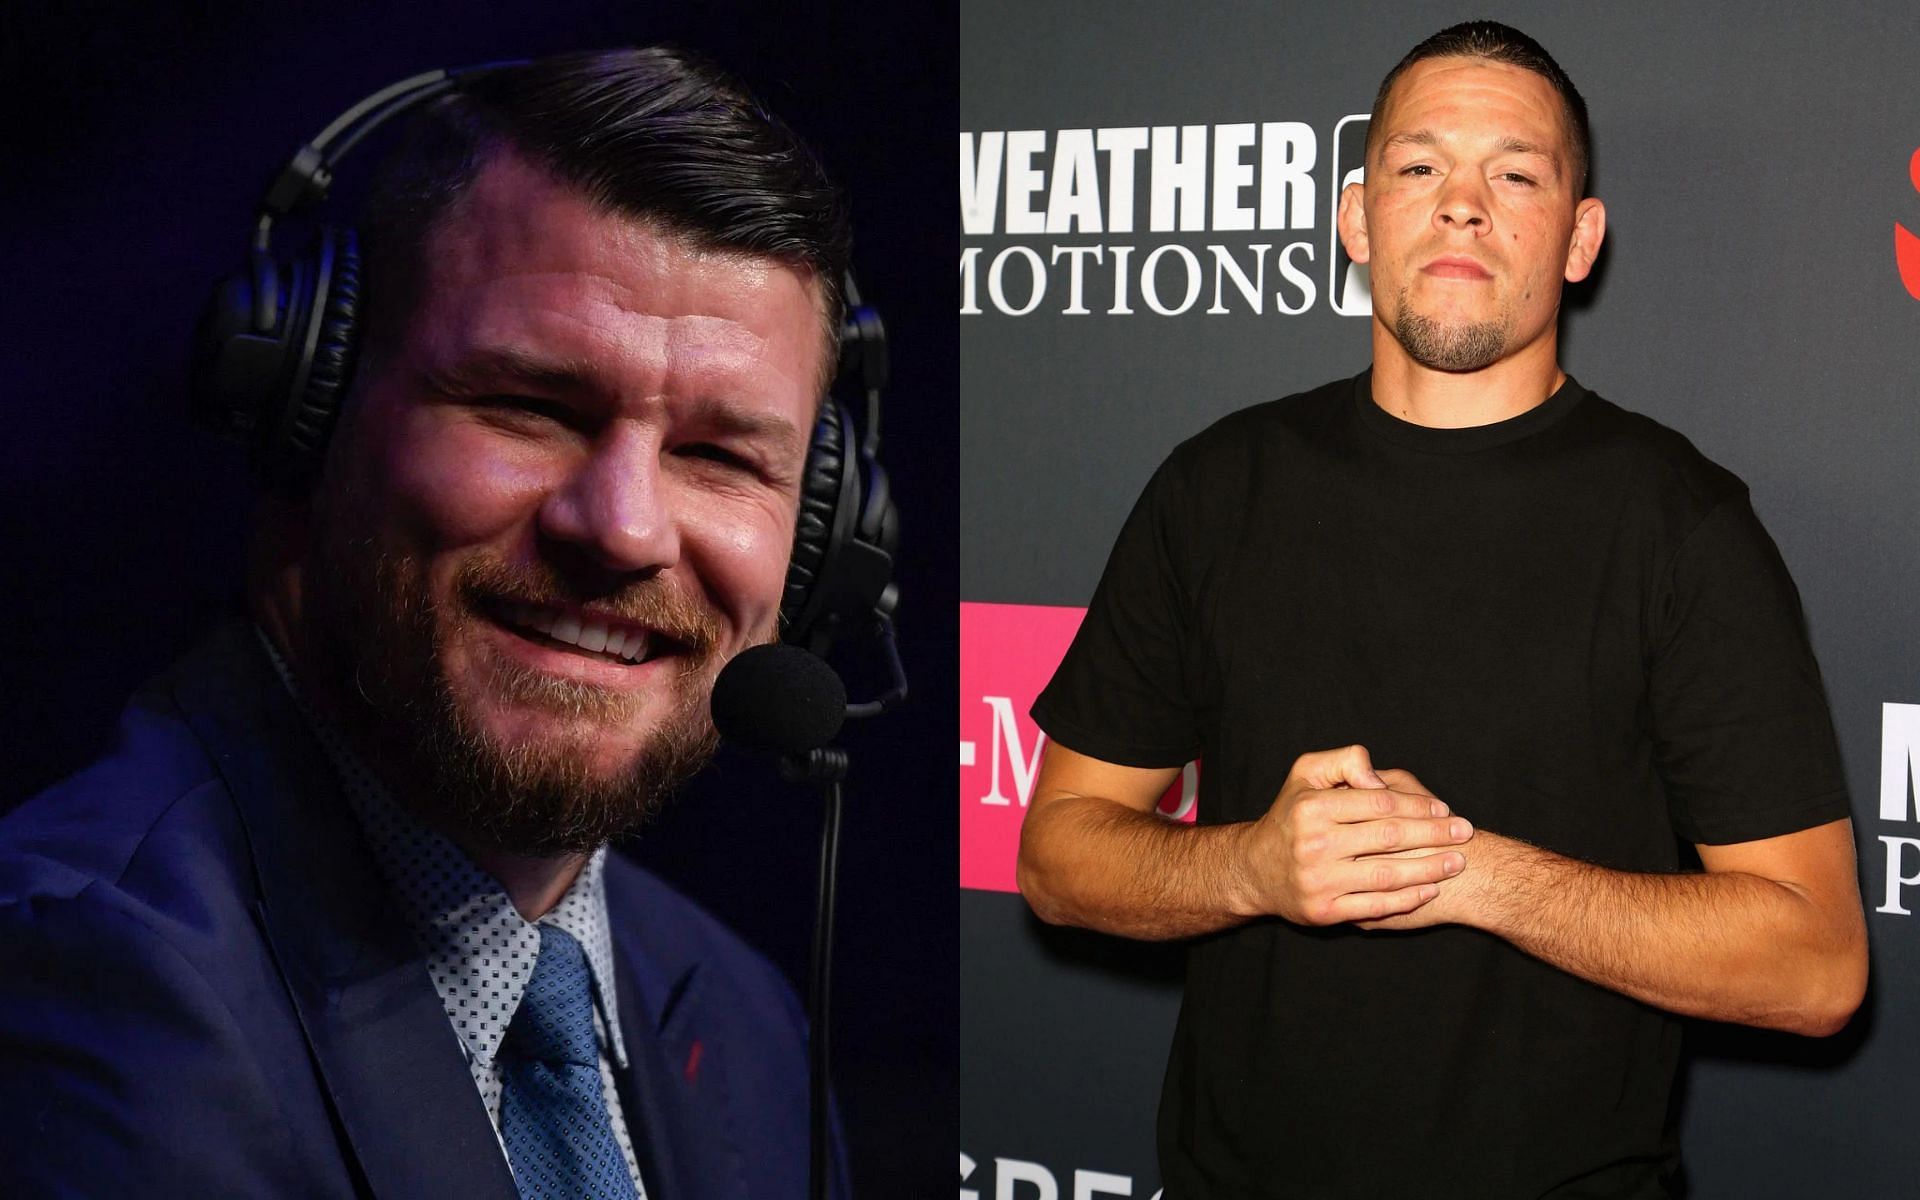 Michael Bisping (left) and Nate Diaz (right) [Images courtesy of Getty]